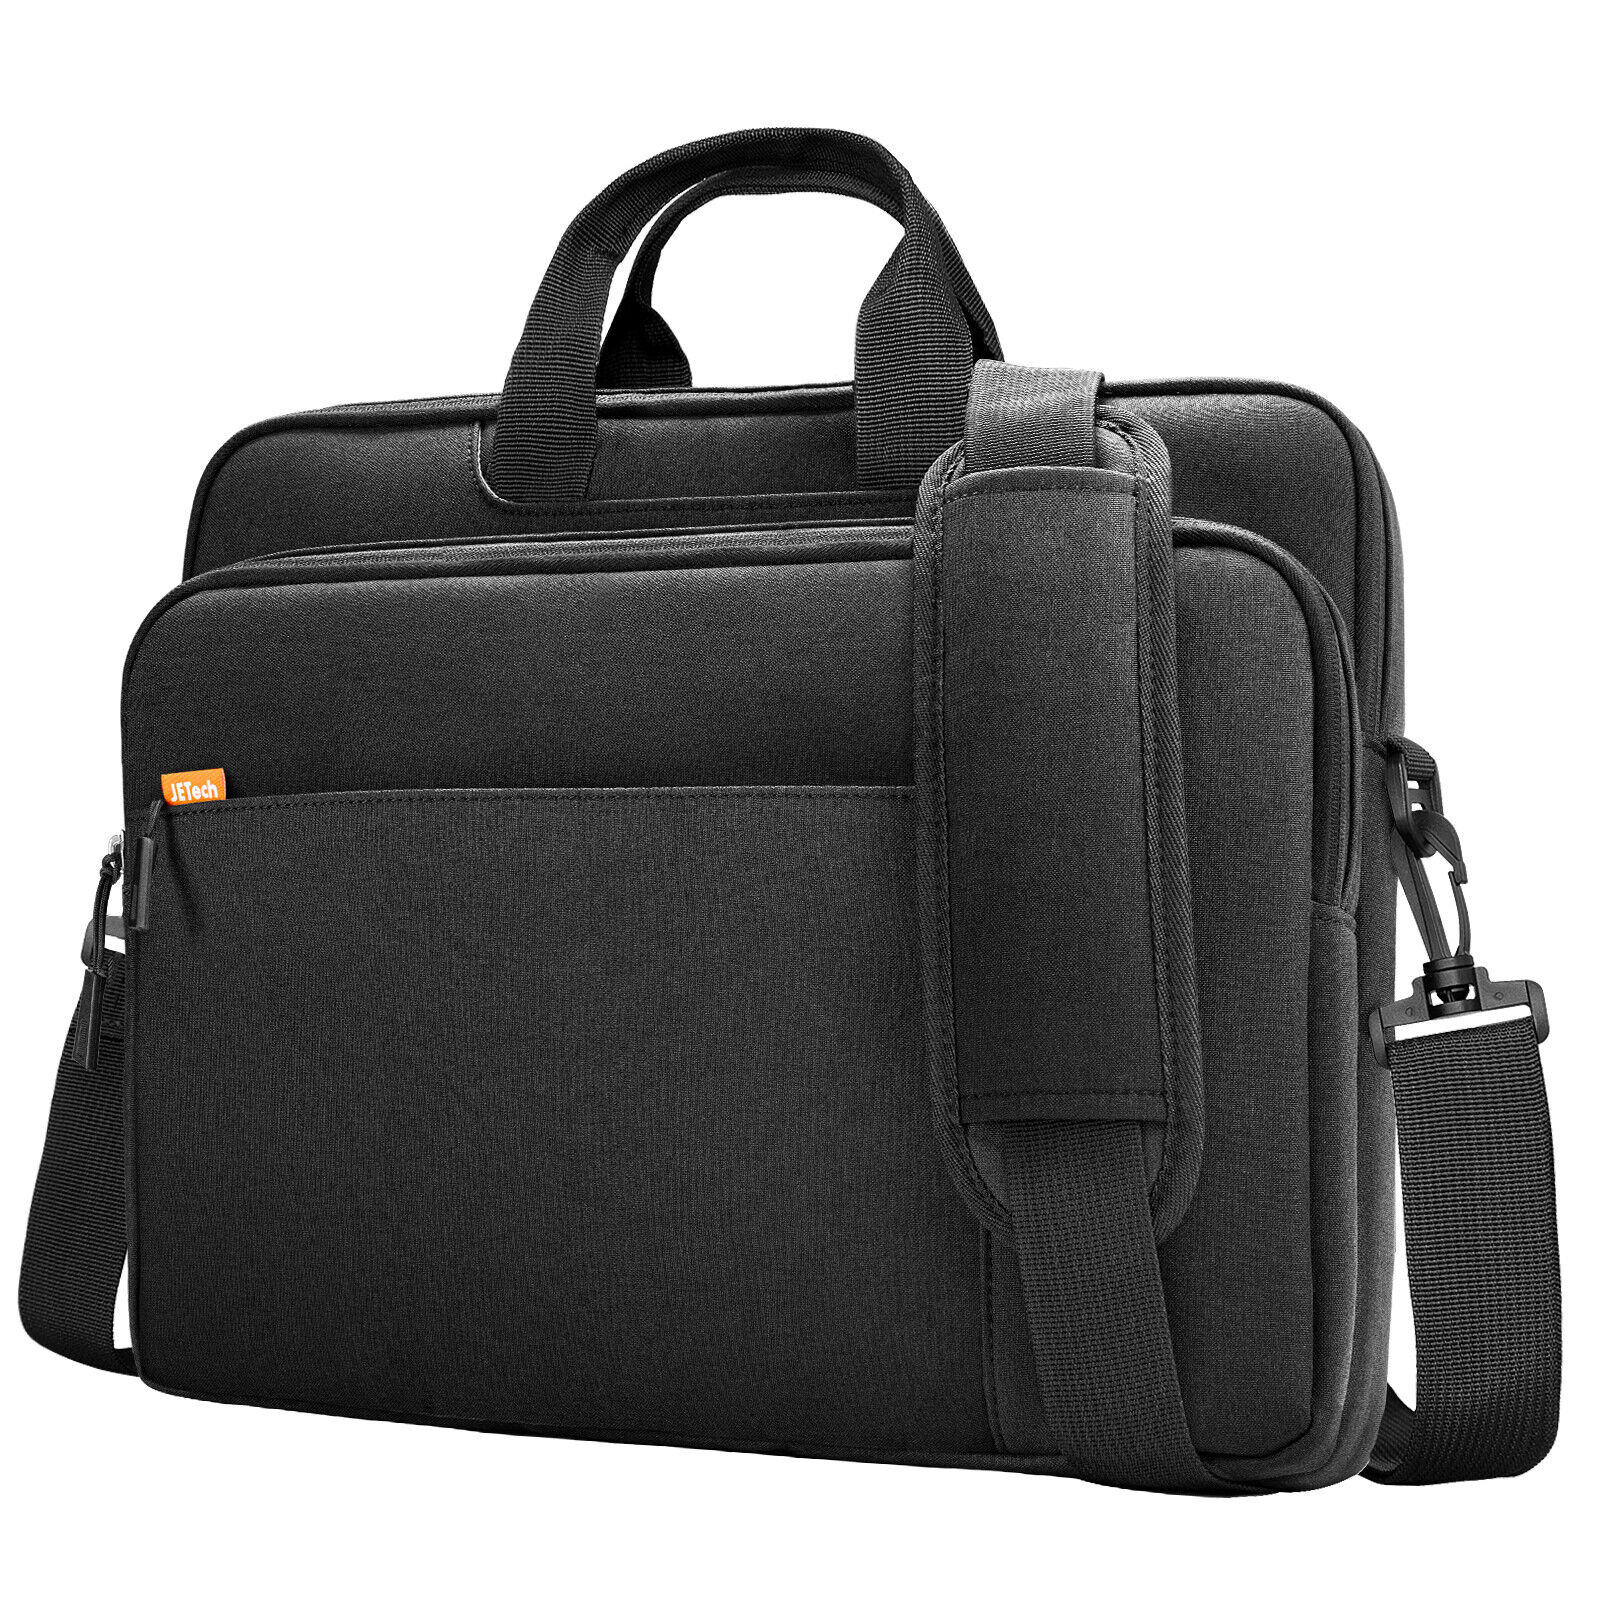 JETech Laptop Shoulder Bag for 15.6-Inch Tablet Waterproof with Portable Handle